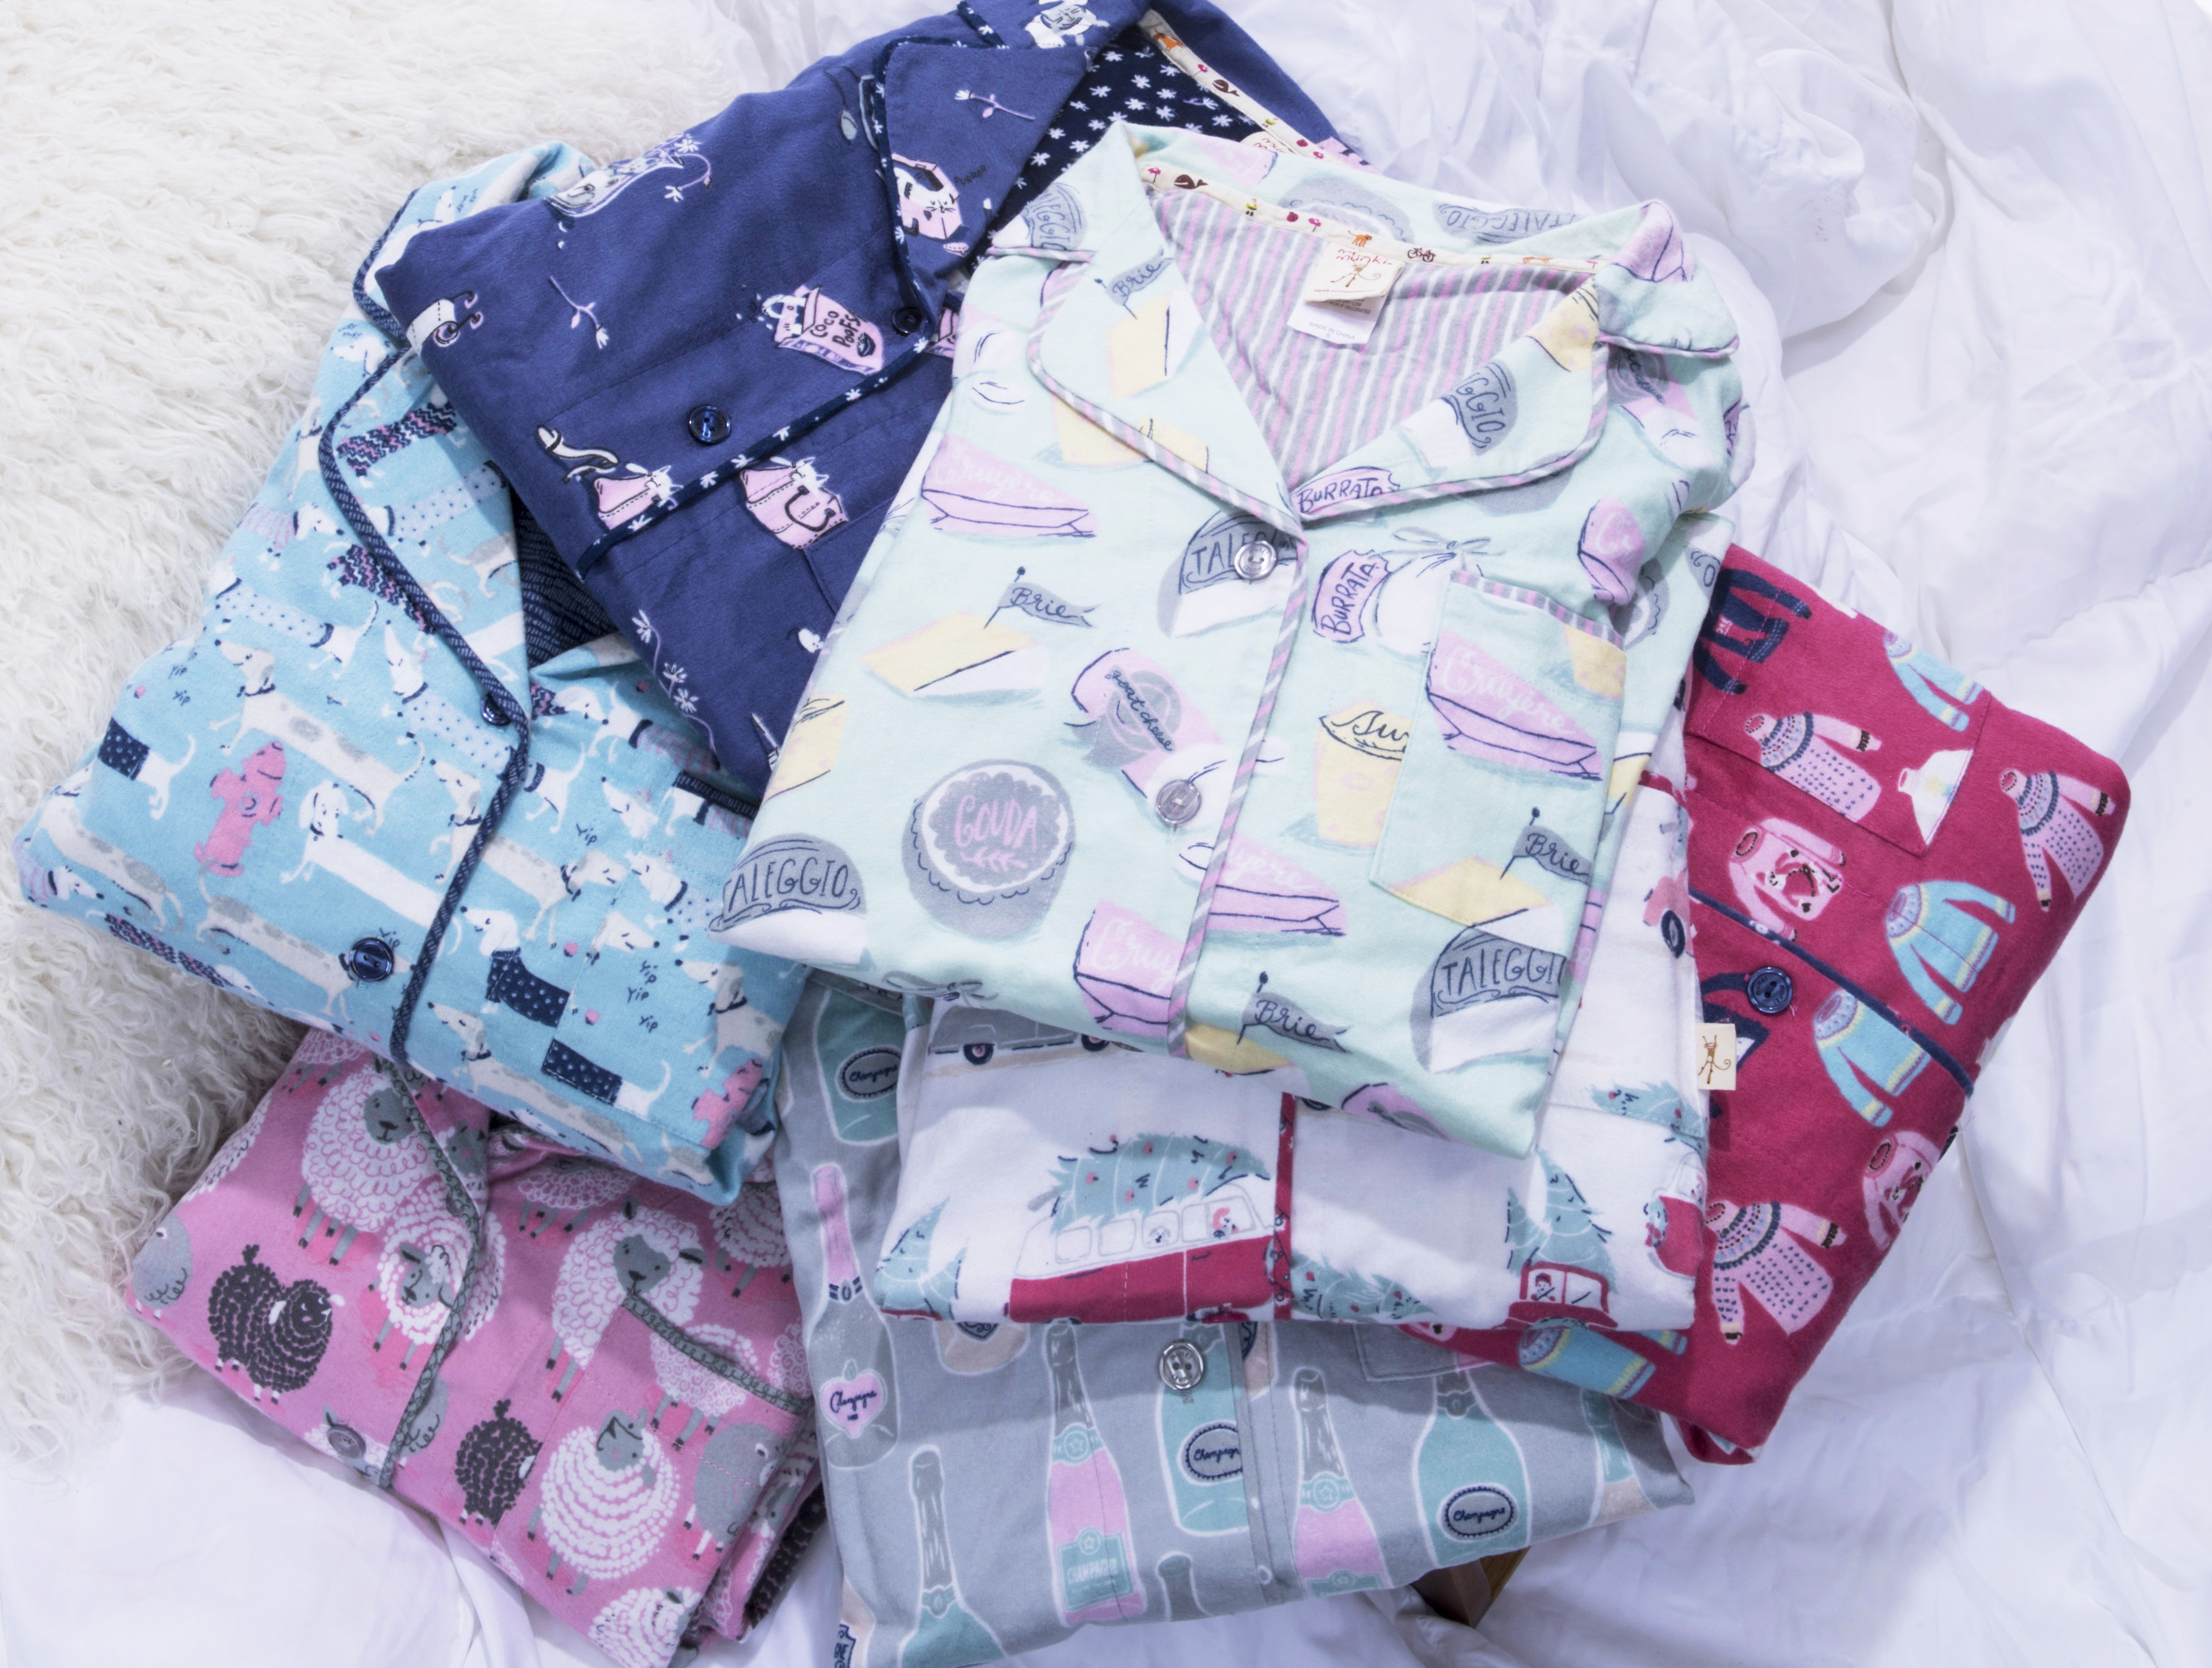 5 Flannel Pajamas To Make The Best Of A Snow Day - Munki Munki